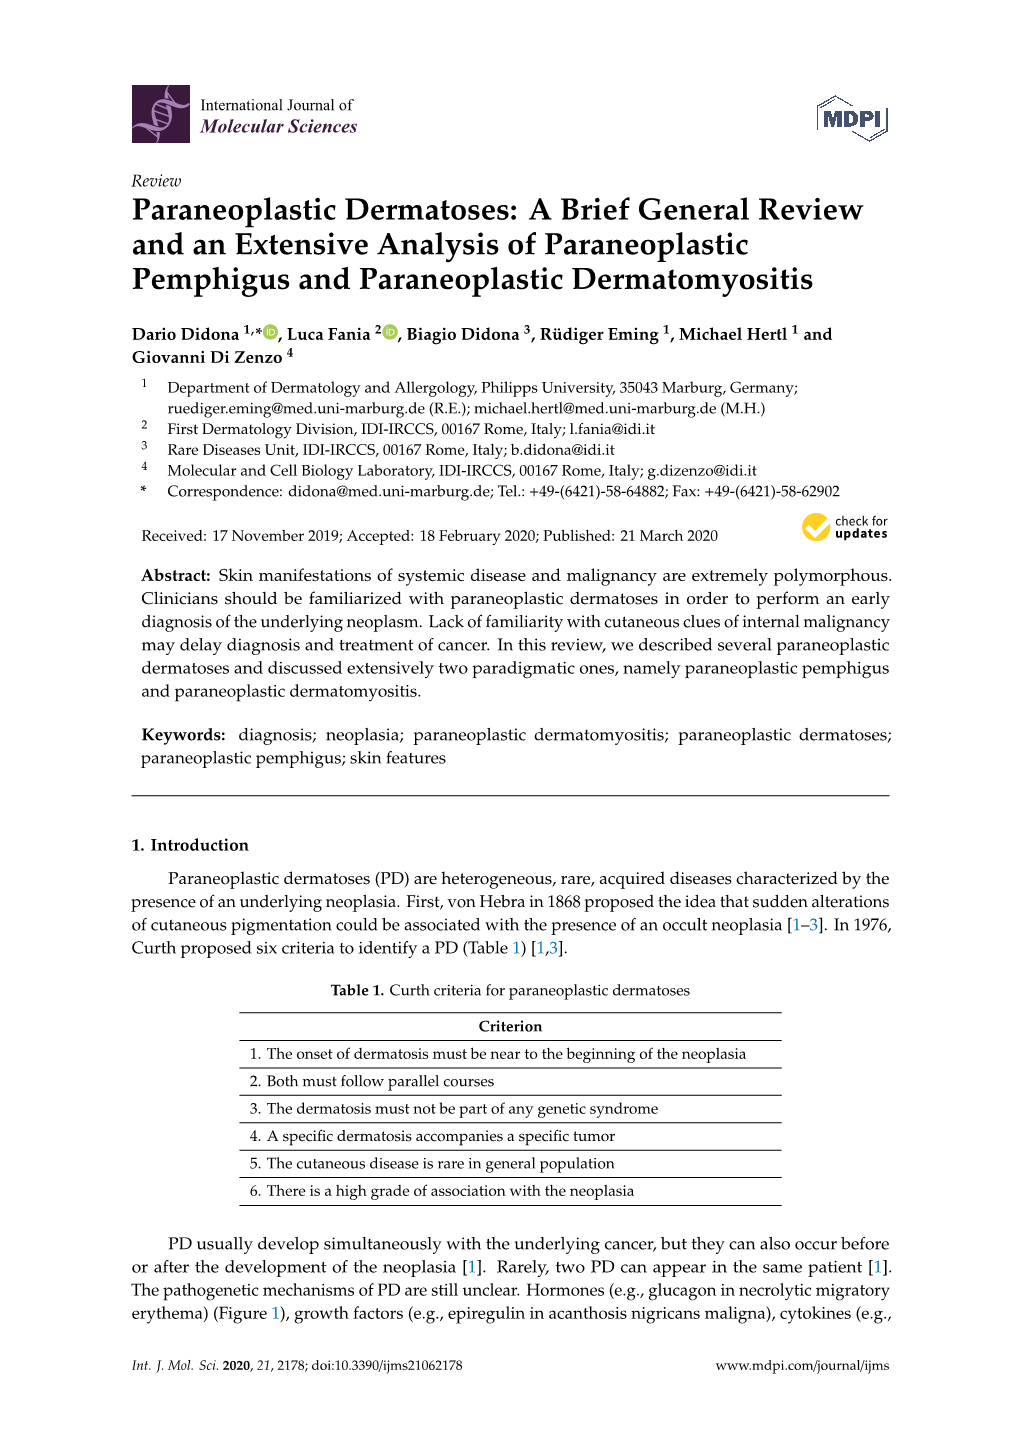 Paraneoplastic Dermatoses: a Brief General Review and an Extensive Analysis of Paraneoplastic Pemphigus and Paraneoplastic Dermatomyositis